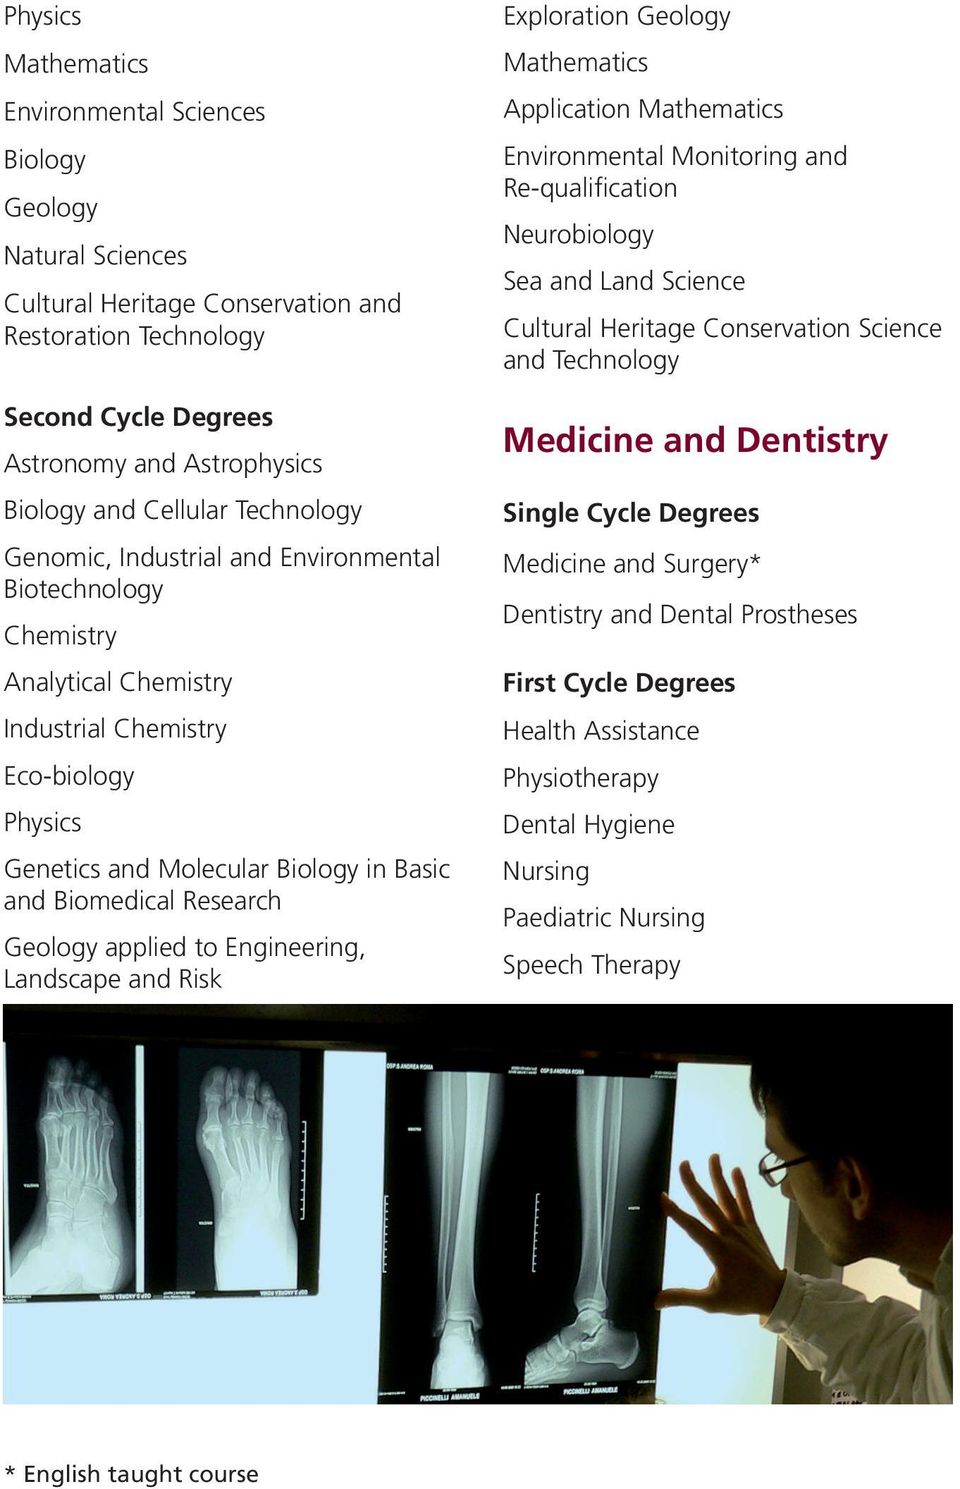 Technology Genomic, Industrial and Environmental Biotechnology Medicine and Surgery* Chemistry Dentistry and Dental Prostheses Analytical Chemistry Industrial Chemistry Health Assistance Eco-biology